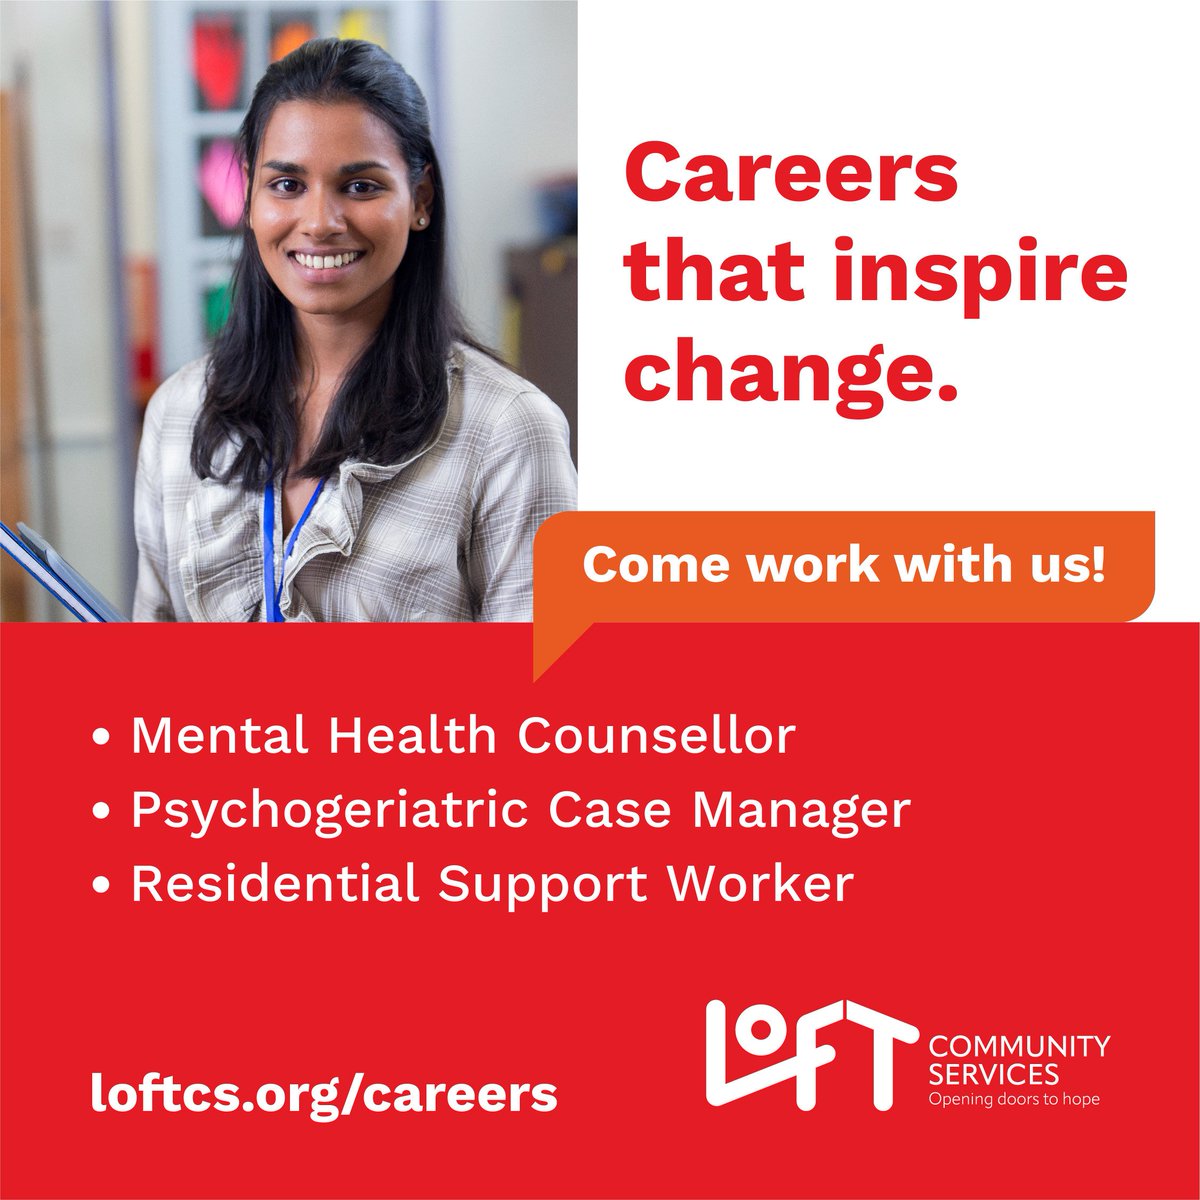 We are #hiring! Apply today for an opportunity to make a meaningful community impact and grow with an amazing team and organization. View our current job openings at: loftcs.org/careers. #NowHiring #Jobs #ApplyNow #CommunitySupport